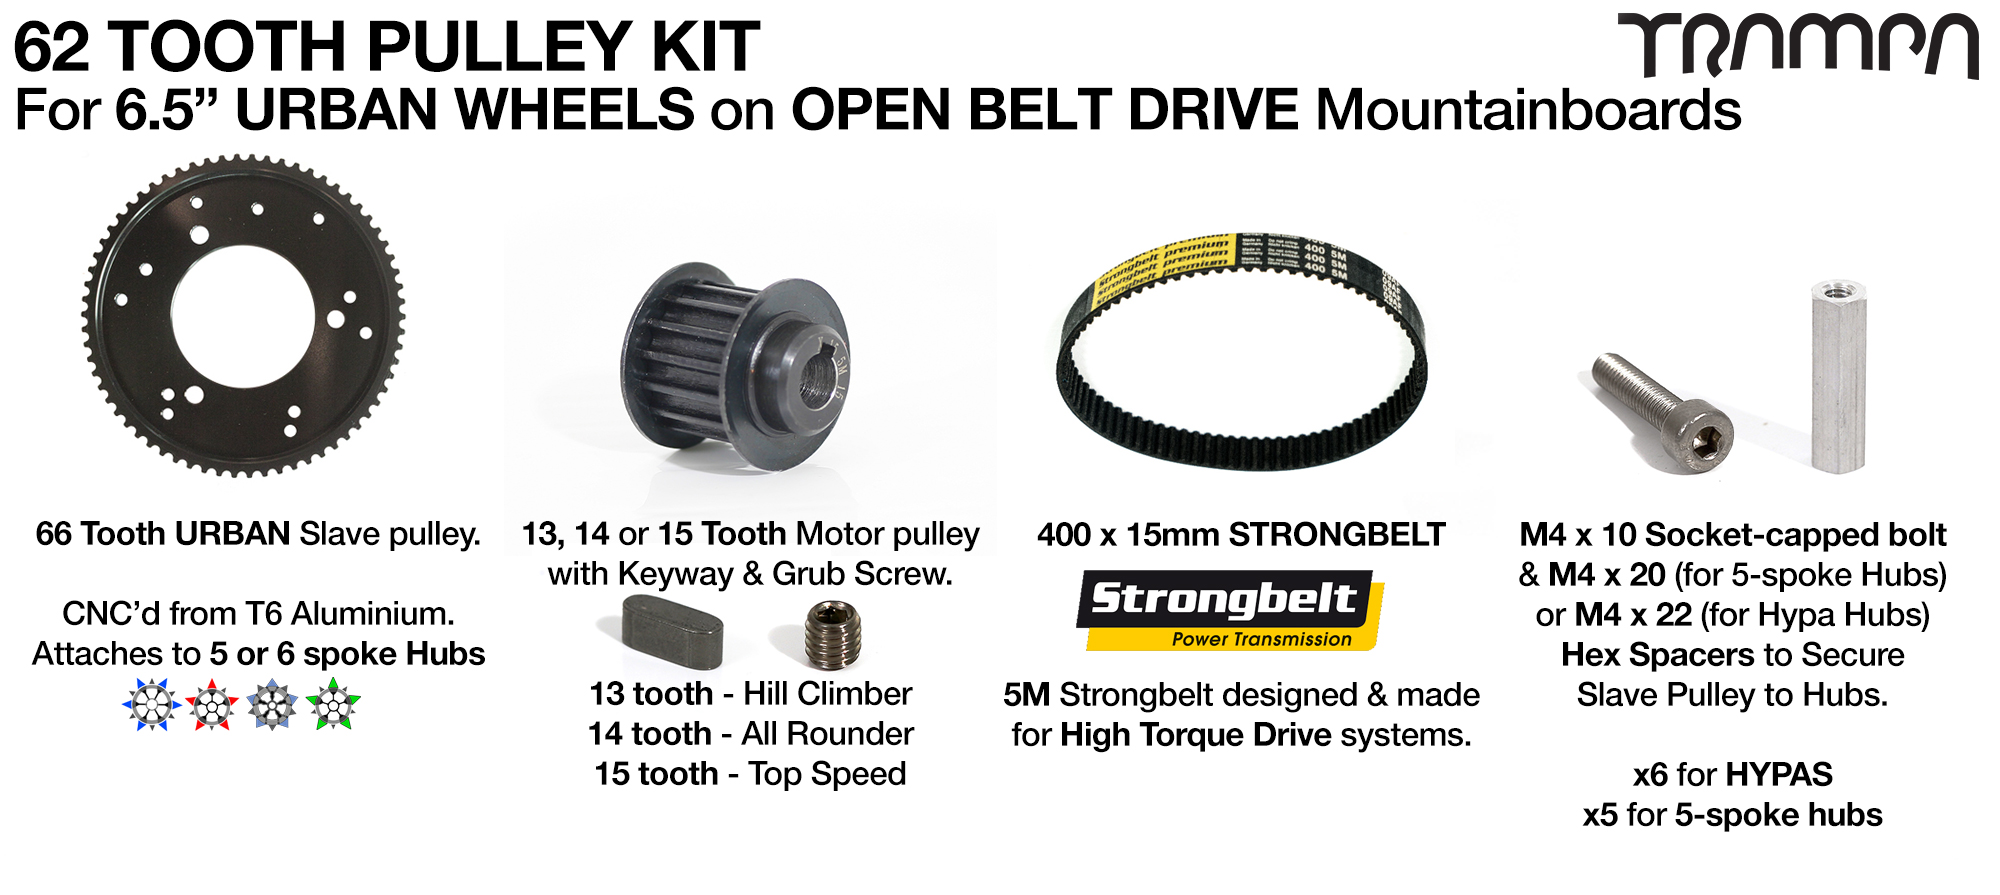 66T OBD 62 Tooth Pulley Kit with 400 x 15mm Belt - URBAN Wheels